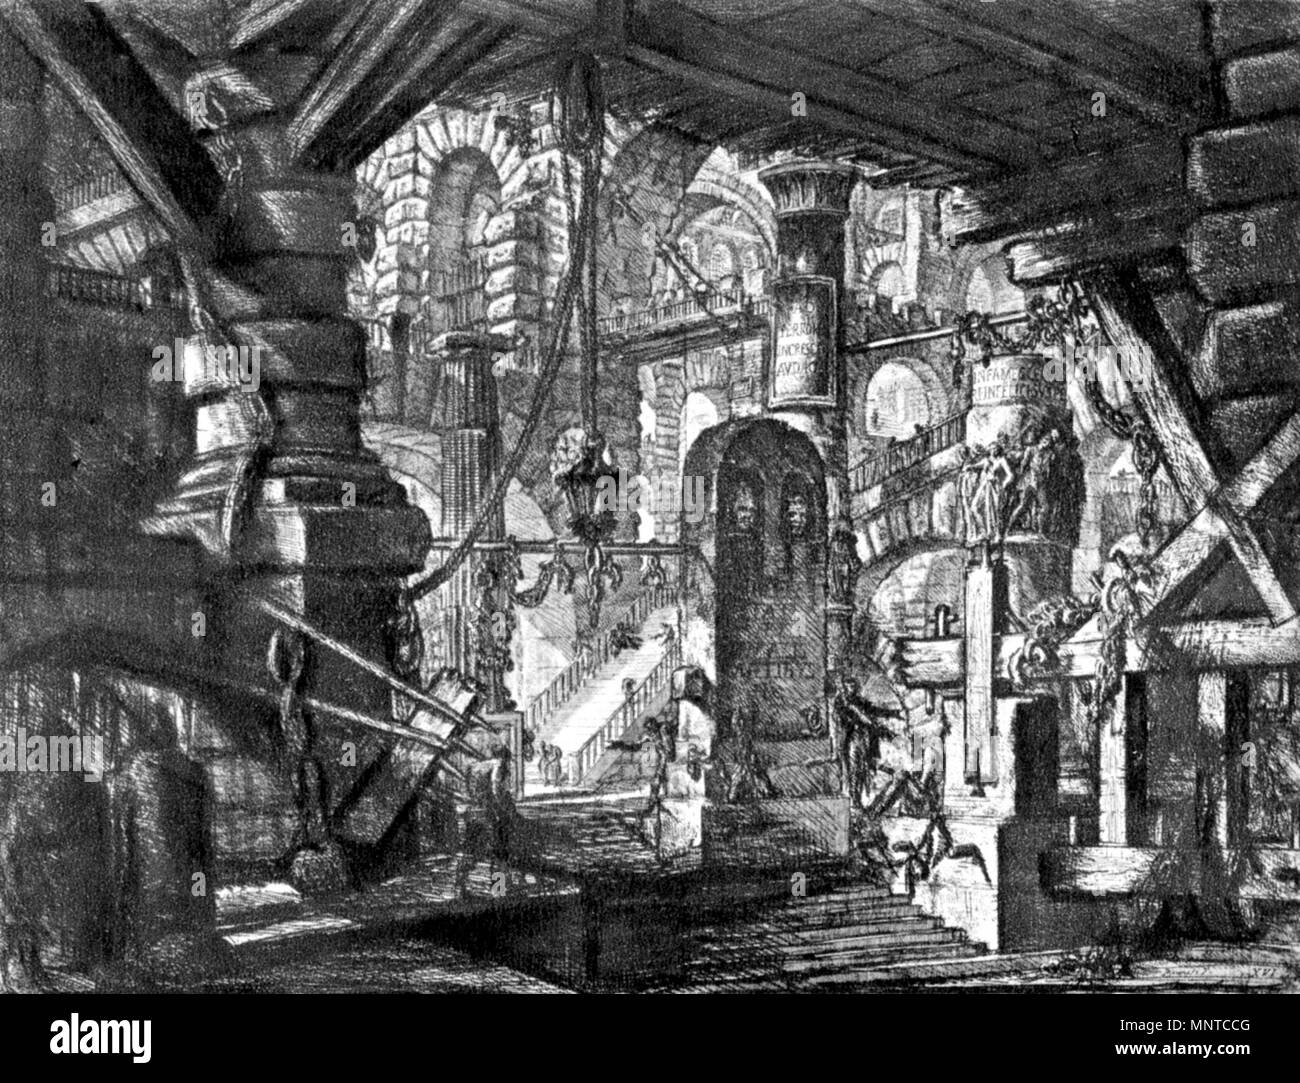 .   Giovanni Battista Piranesi  (1720–1778)       Alternative names Gian Battista Piranesi; Giovan Battista Piranesi; Piranesi; Gianbattista Piranesi  Description printmaker, architect and engraver  Date of birth/death 4 October 1720 9 November 1778  Location of birth/death Mogliano Veneto, Republic of Venice Rome, Papal States  Authority control  : Q316307 VIAF: 2546239 ISNI: 0000 0001 2117 9992 ULAN: 500114965 LCCN: n79006767 NLA: 35424195 WorldCat    English: Giovanni Battista Piranesi: Untitled etching (called 'The Pier with Chains'), plate XVI (of 16) from the series The Imaginary Prisons Stock Photo